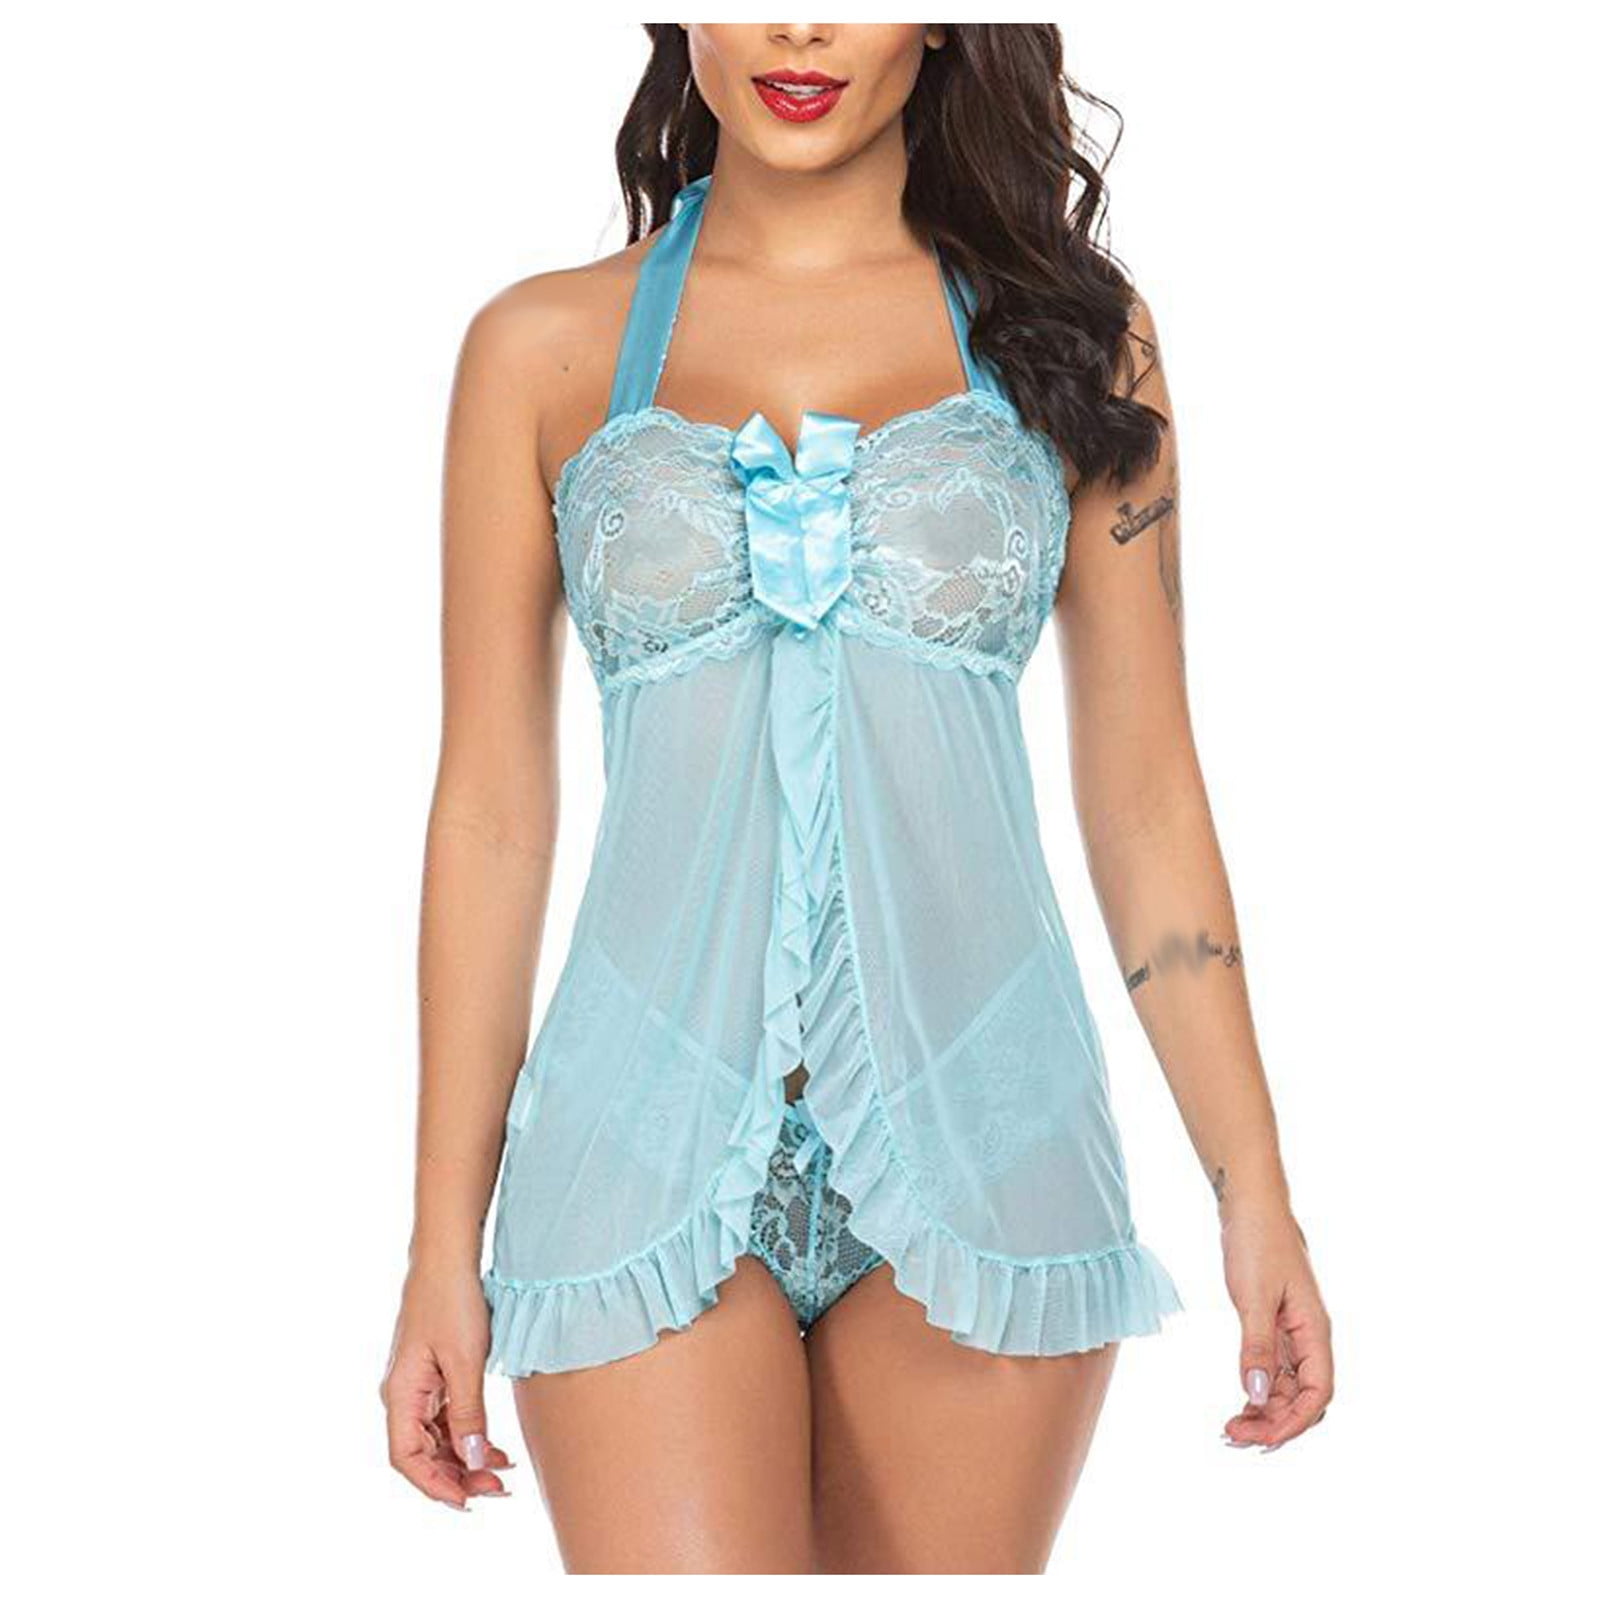 HAPIMO Sales Women's Lingerie Lace Cozy Babydoll See Through Mesh